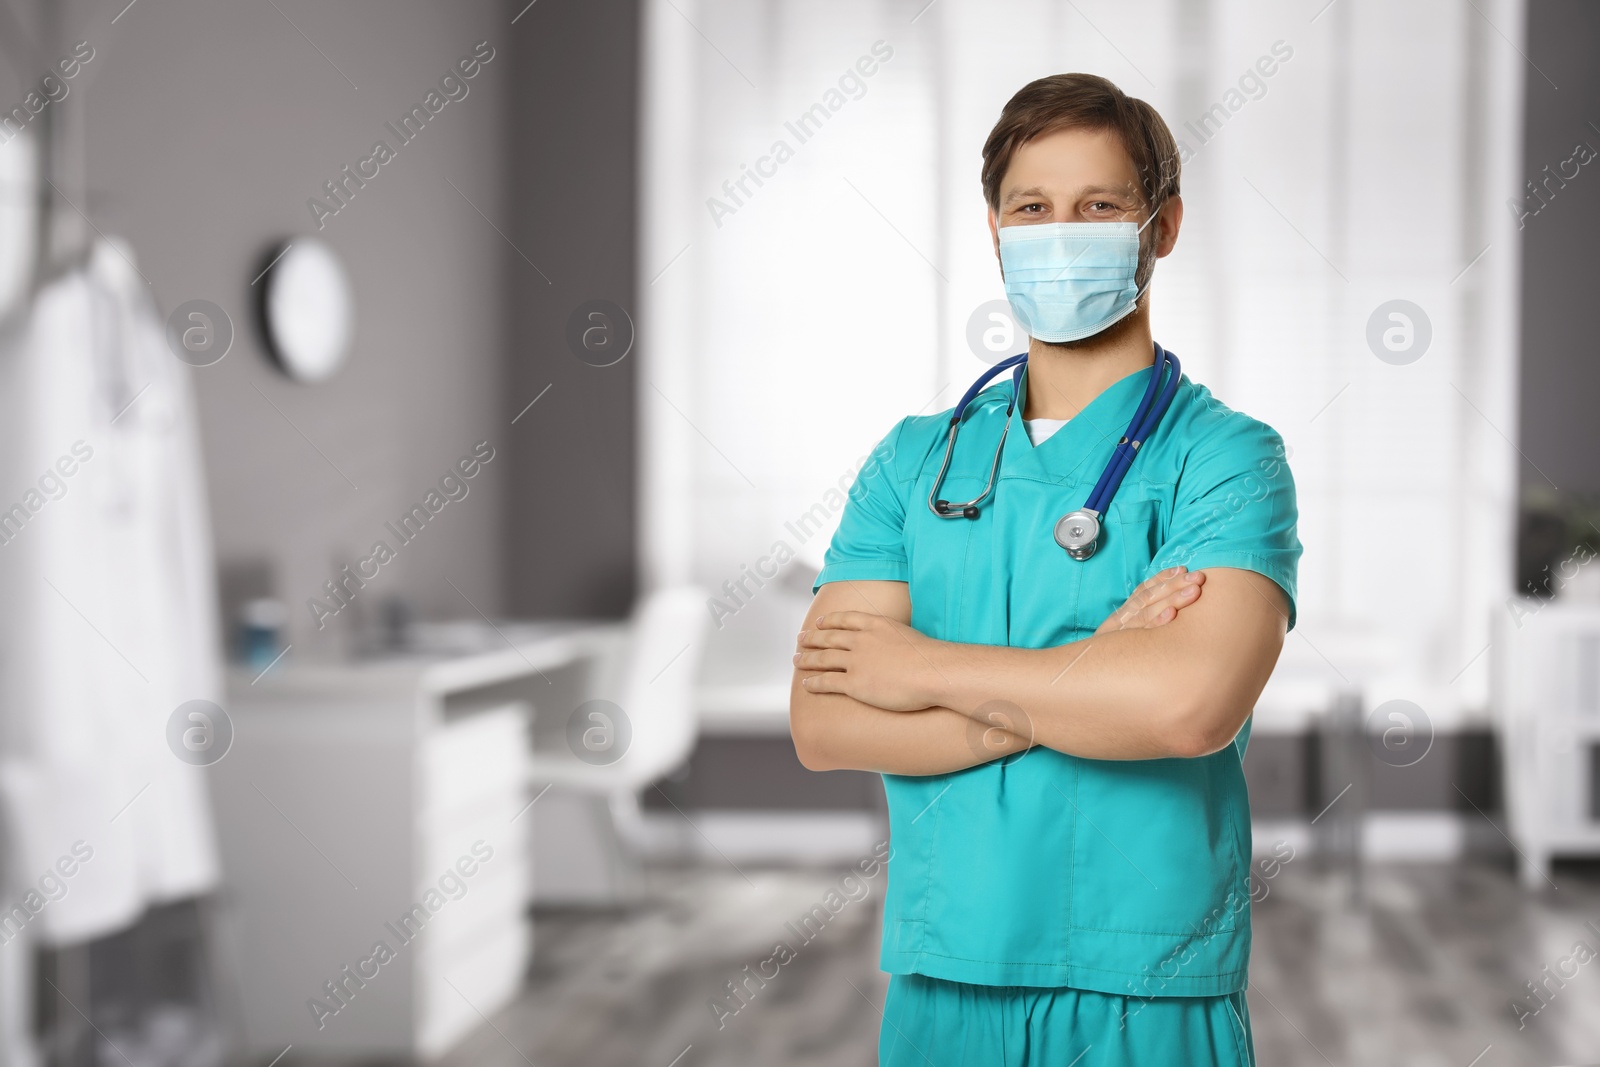 Image of Nurse with stethoscope and medical mask in uniform at hospital